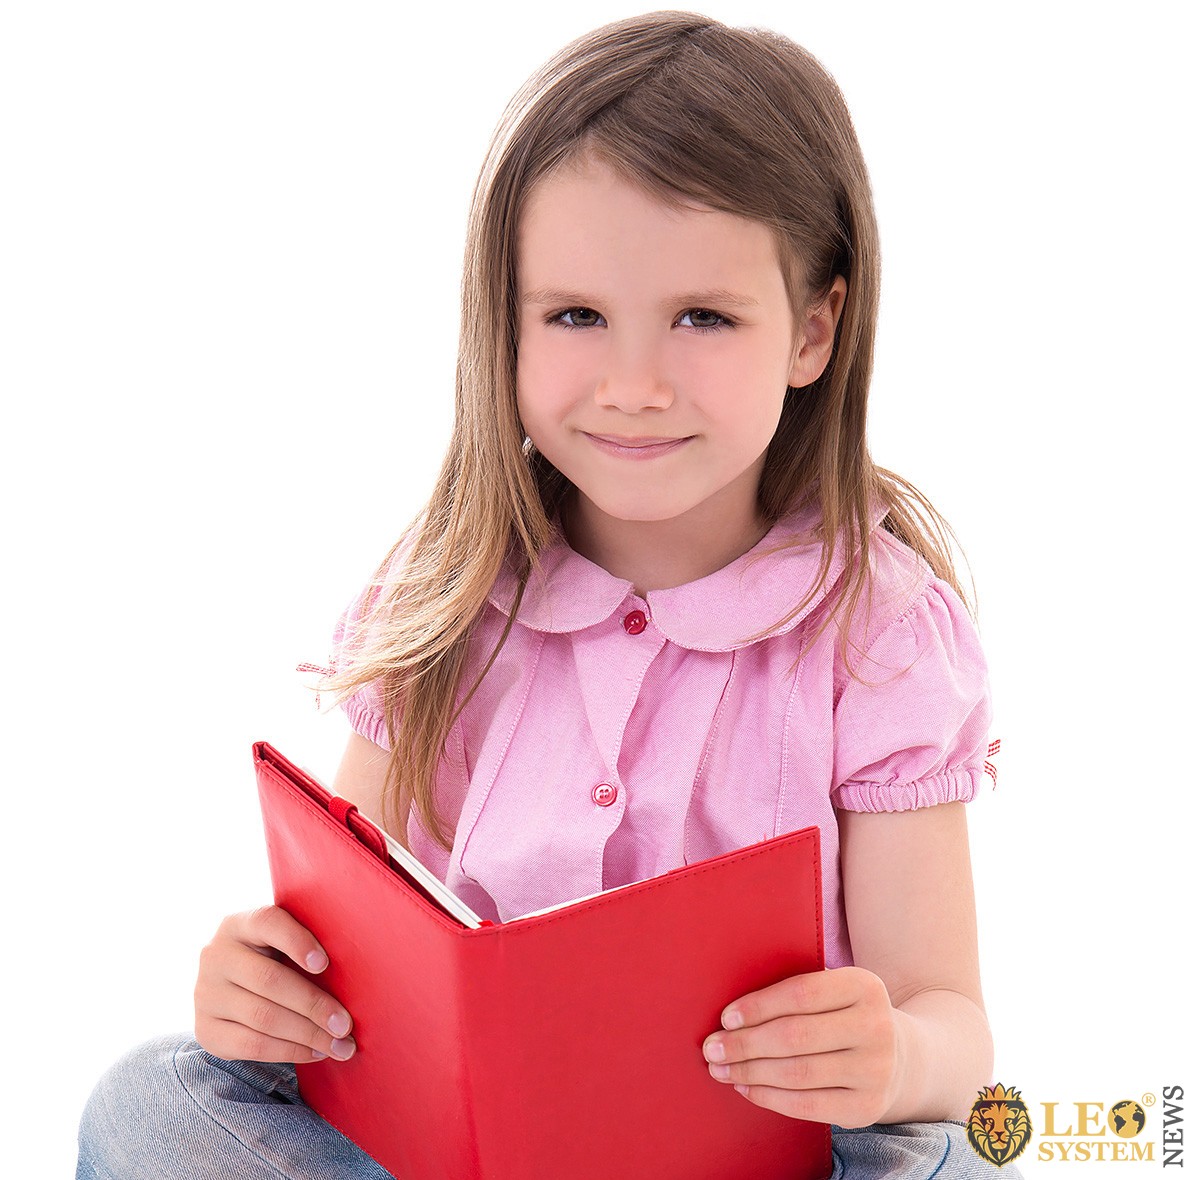 Image of a young girl with a book in her hands